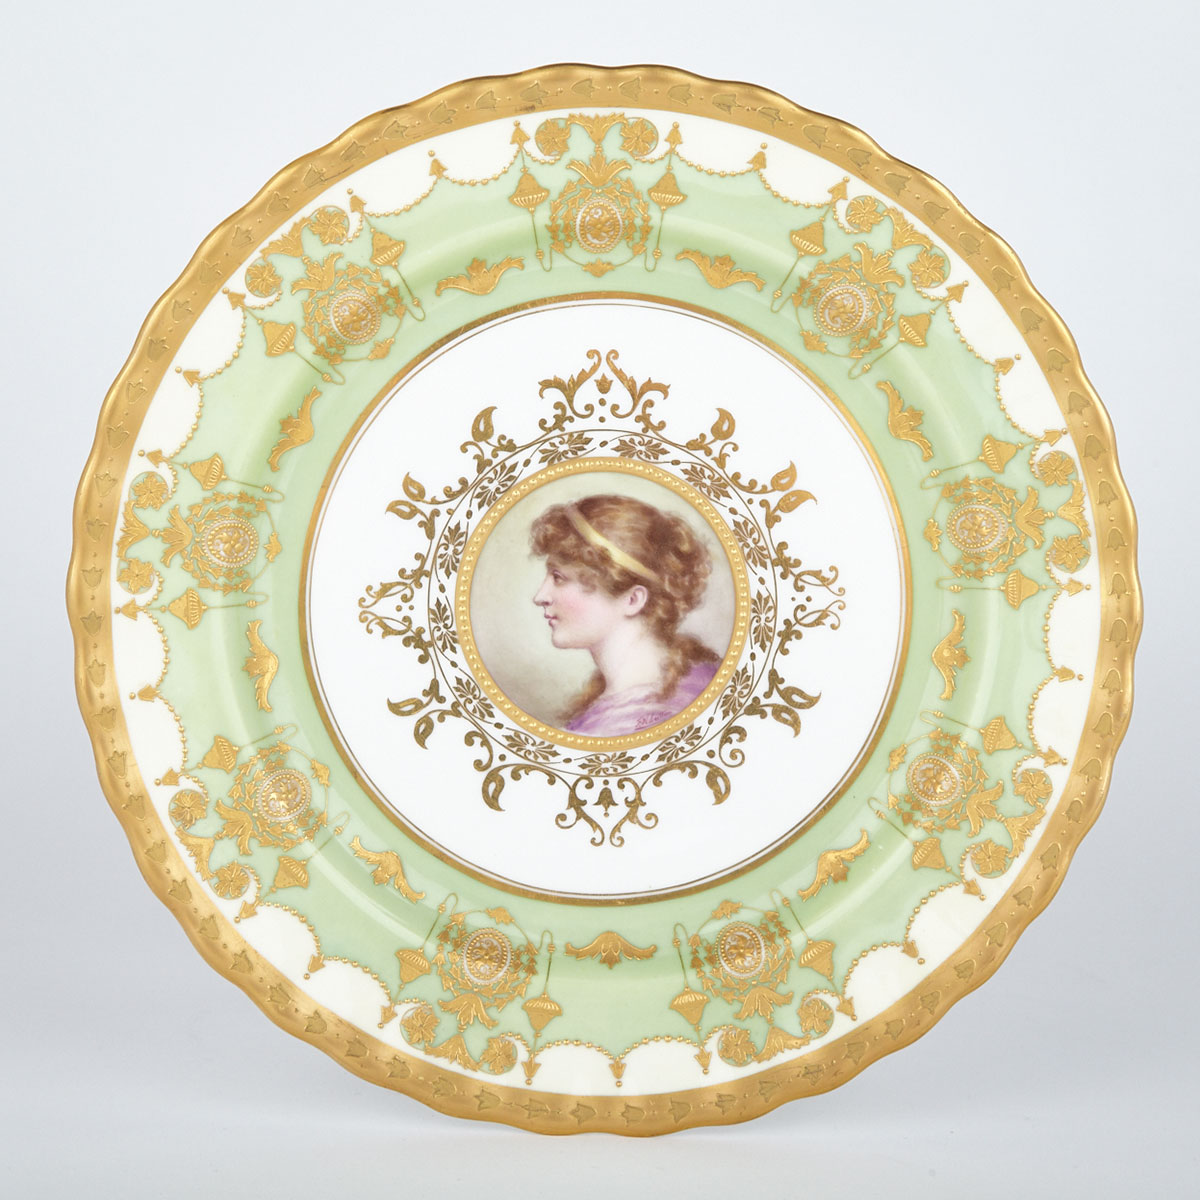 Doulton Cabinet Plate with Portrait of Psyche, c.1900